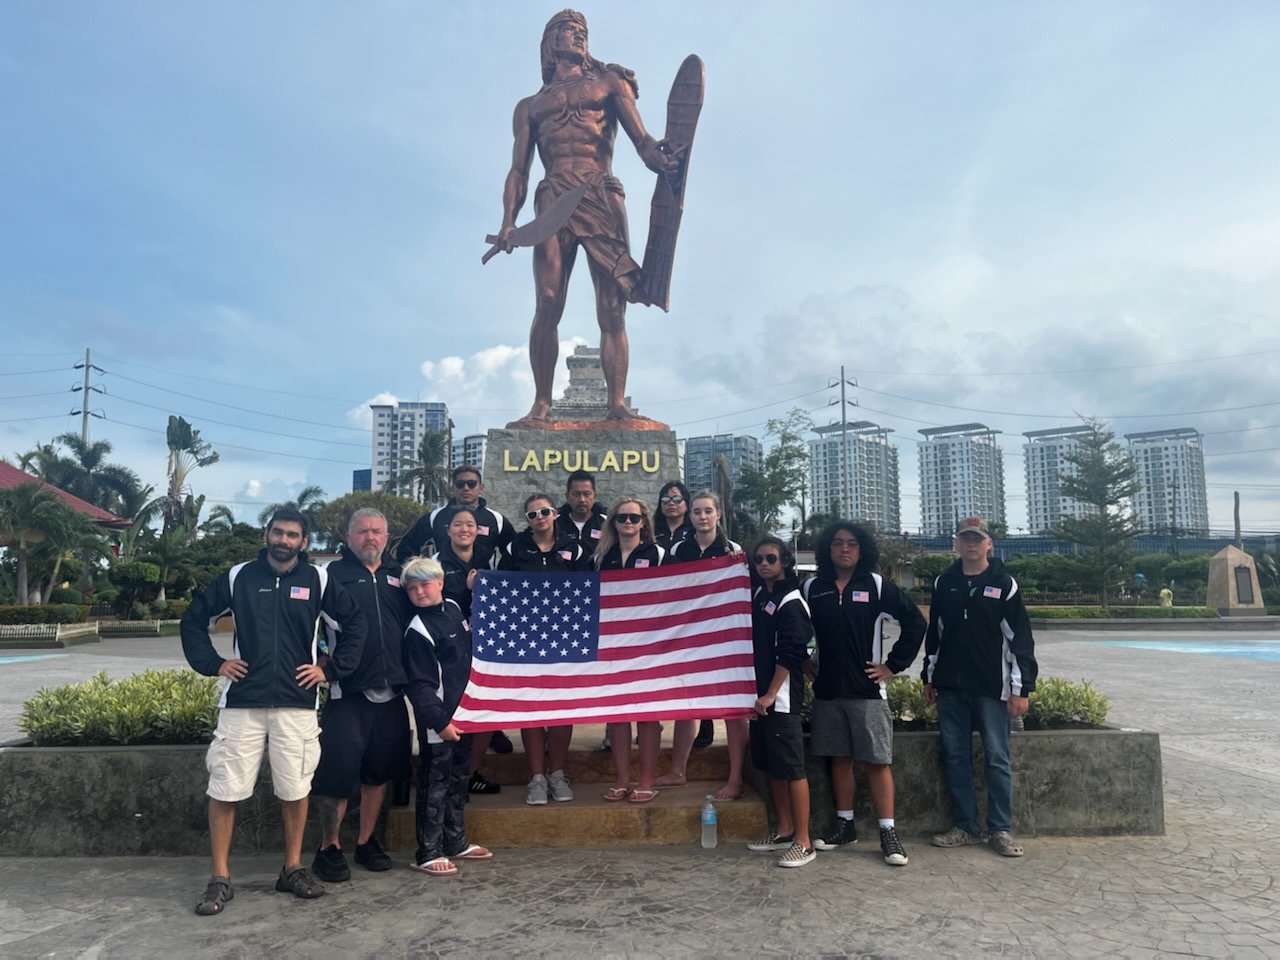 Team USA posed for photos in front of a shrine dedicated to Lapu-Lapu, a folk hero in the Philippines.